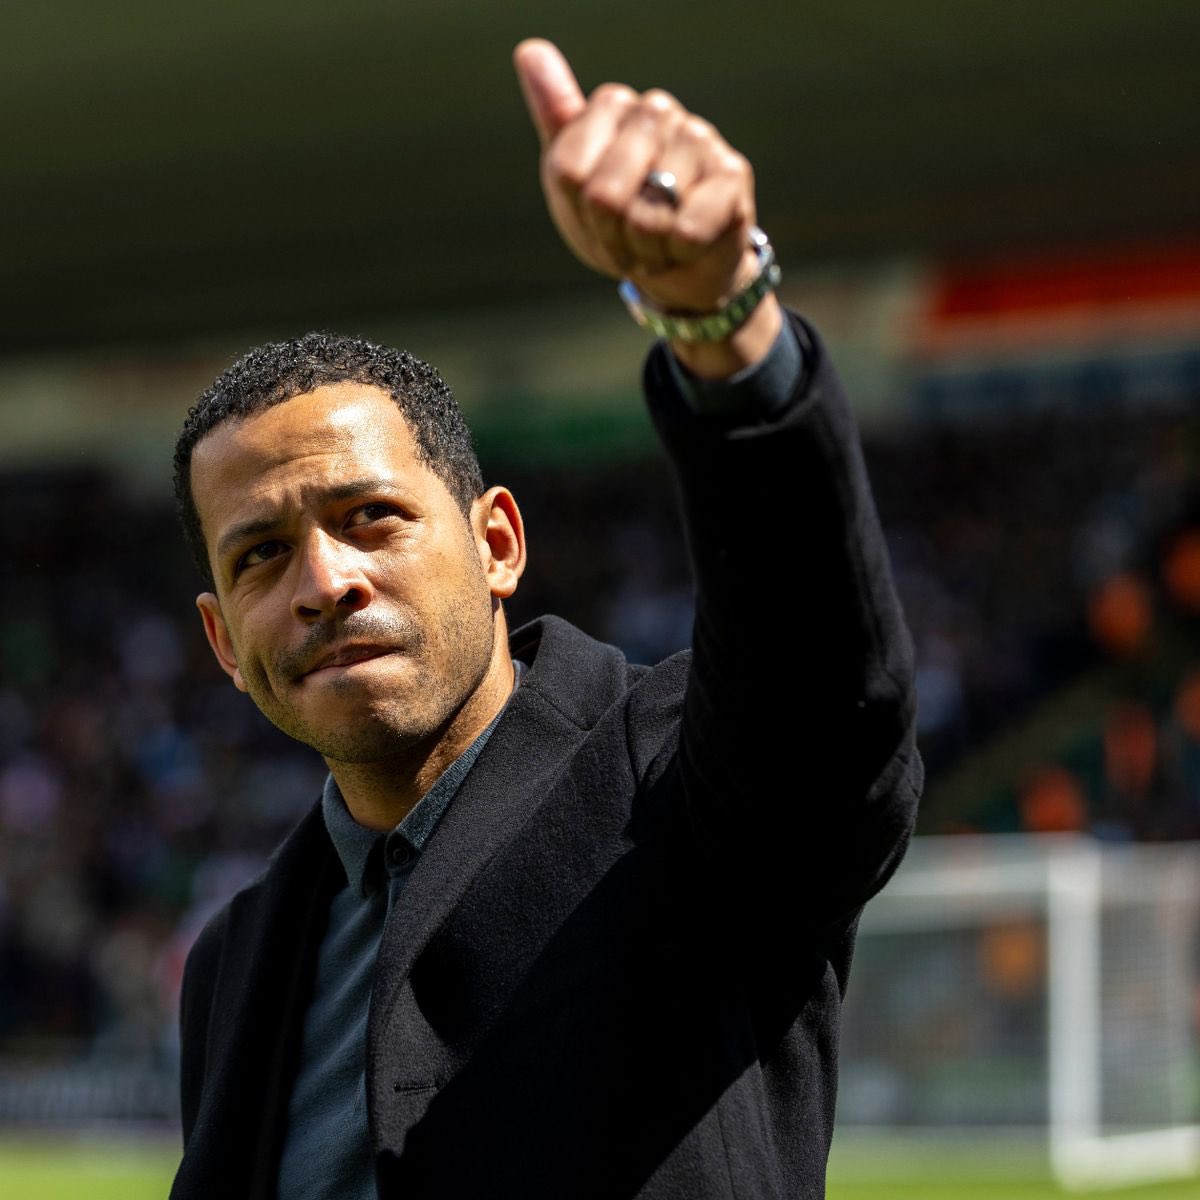 When Liam Rosenior took over at Hull, they were 21st in the Championship. 19 months later, they’ve finished 7th. And now he’s been sacked.